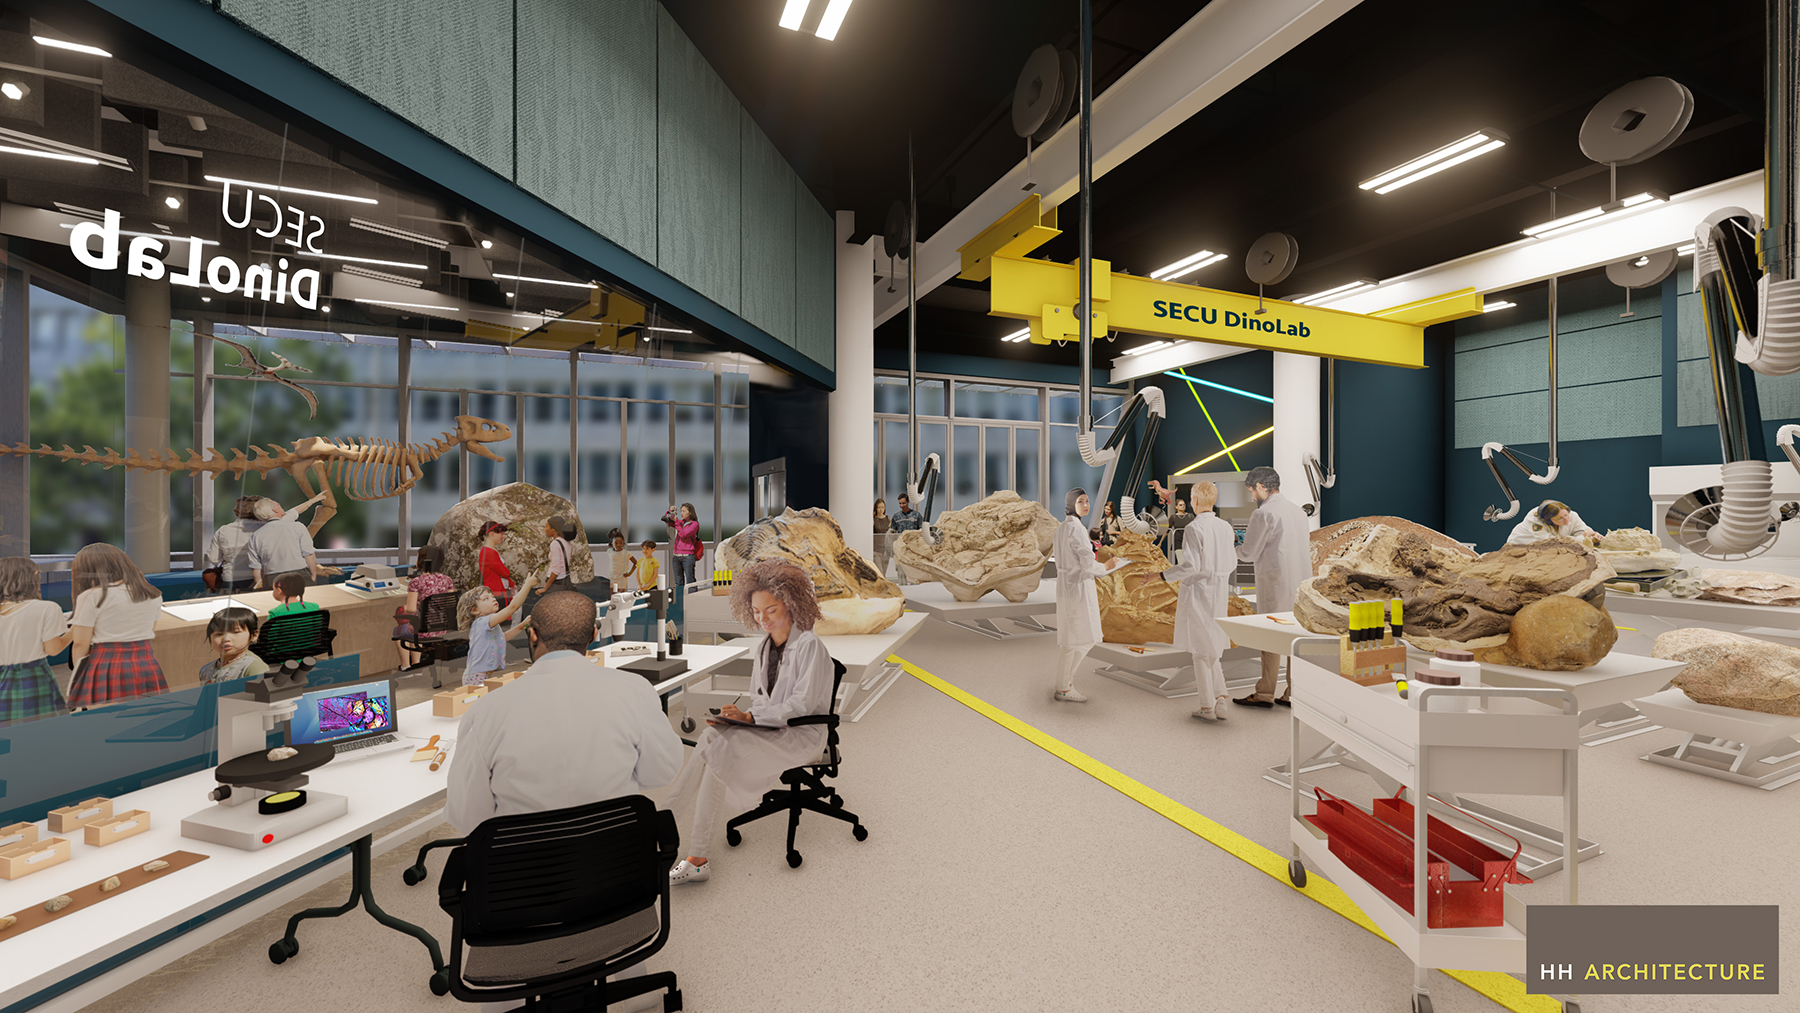 The state-of-the-art dinosaur laboratory will be open to the public so that visitors can interact with the fossils and meet members of the scientific team. (Rendering courtesy of HH Architecture)